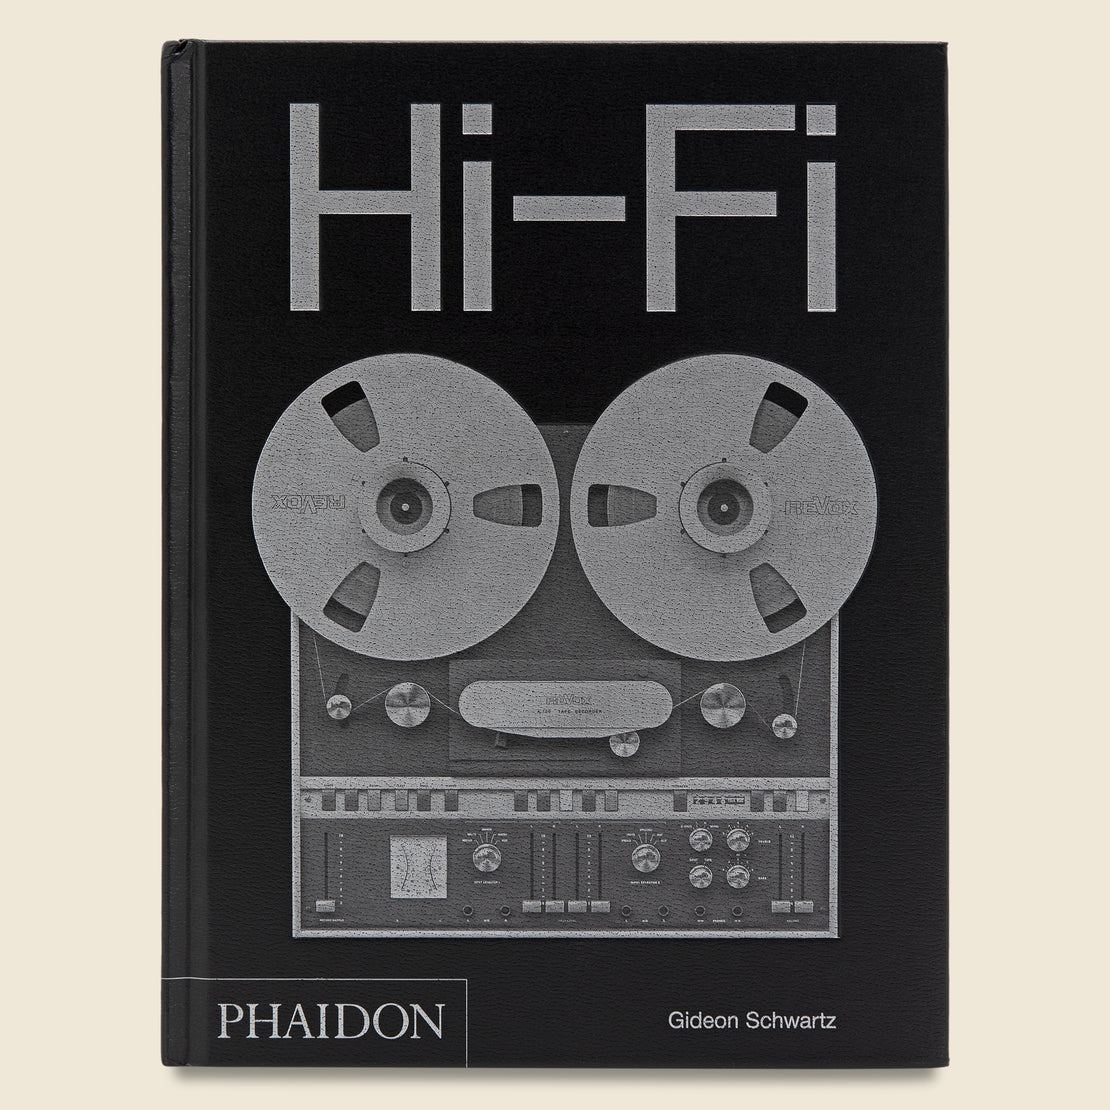 Bookstore Hi-Fi: The History of High-End Audio Design